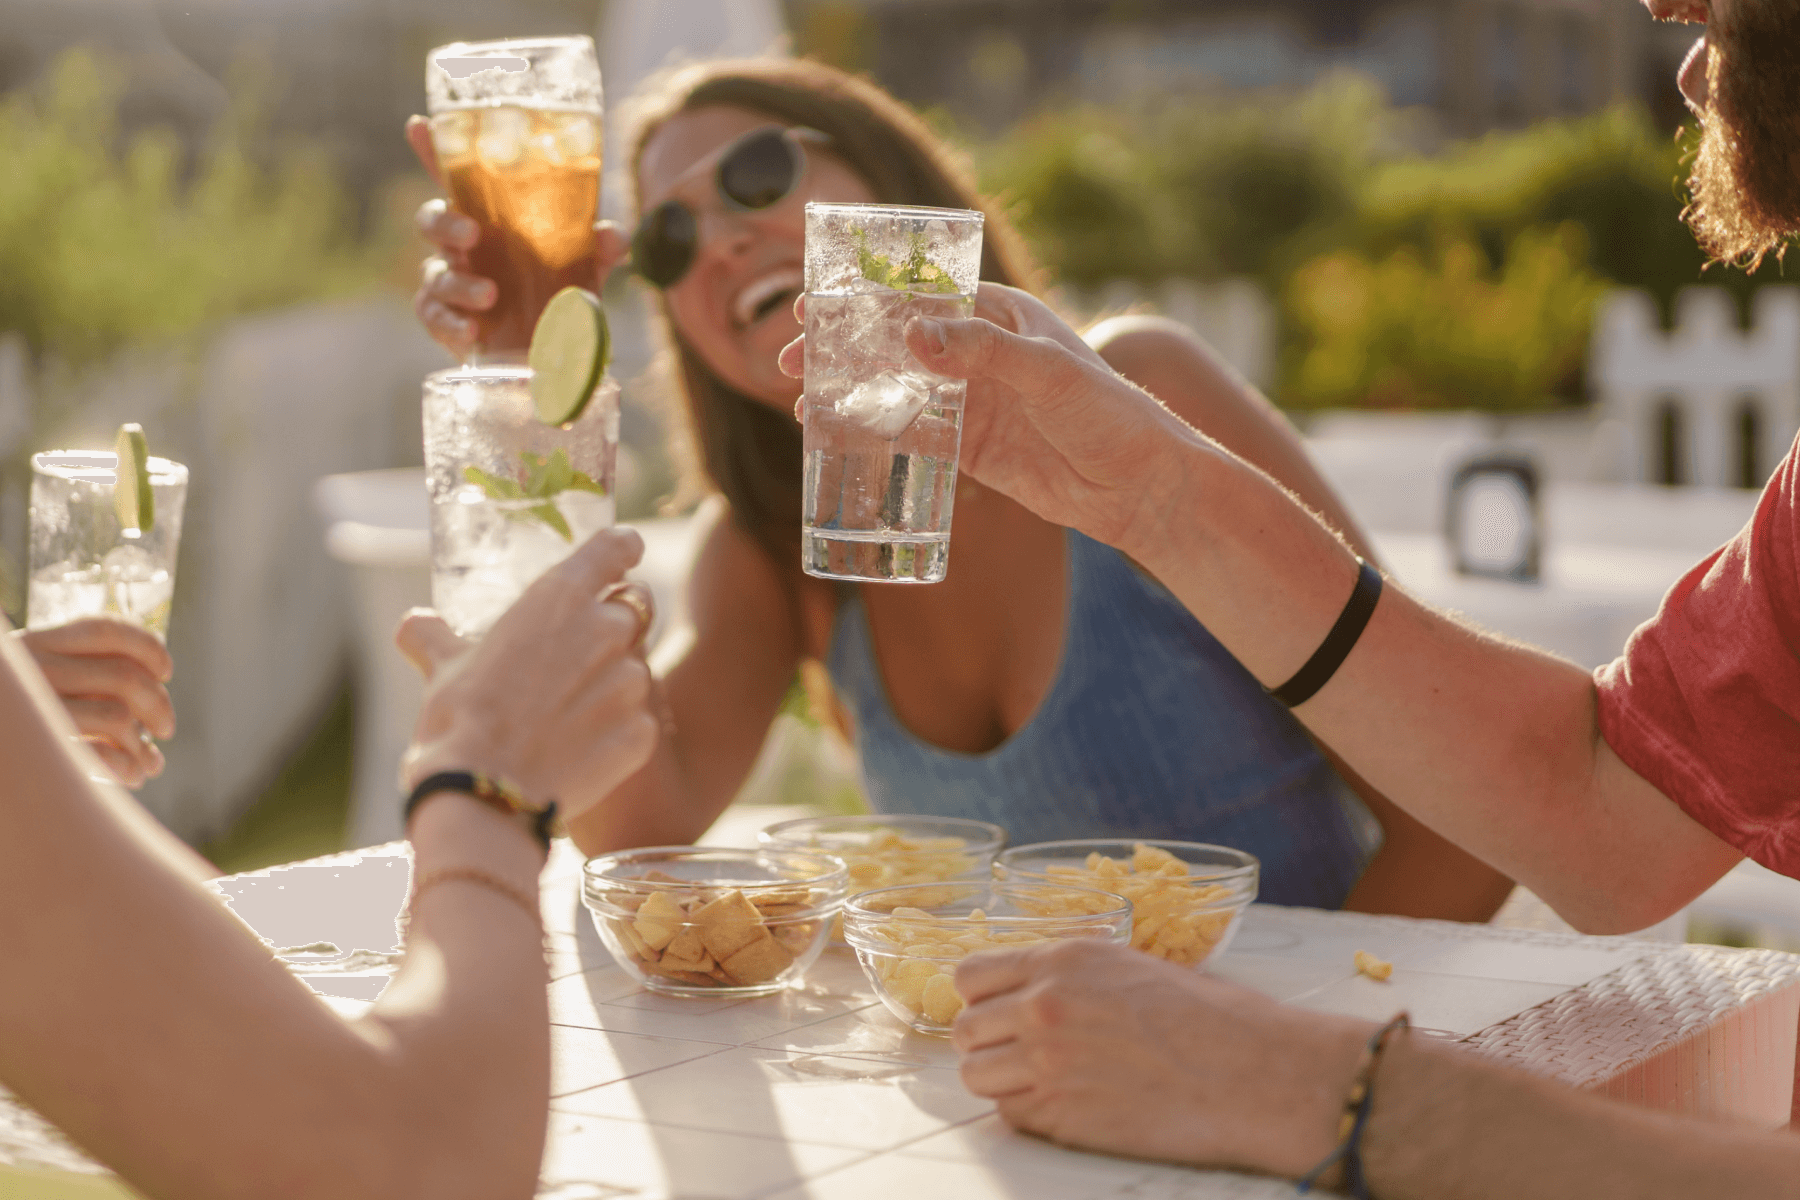 Several people toast with tall glasses outdoors over bowls of chips.